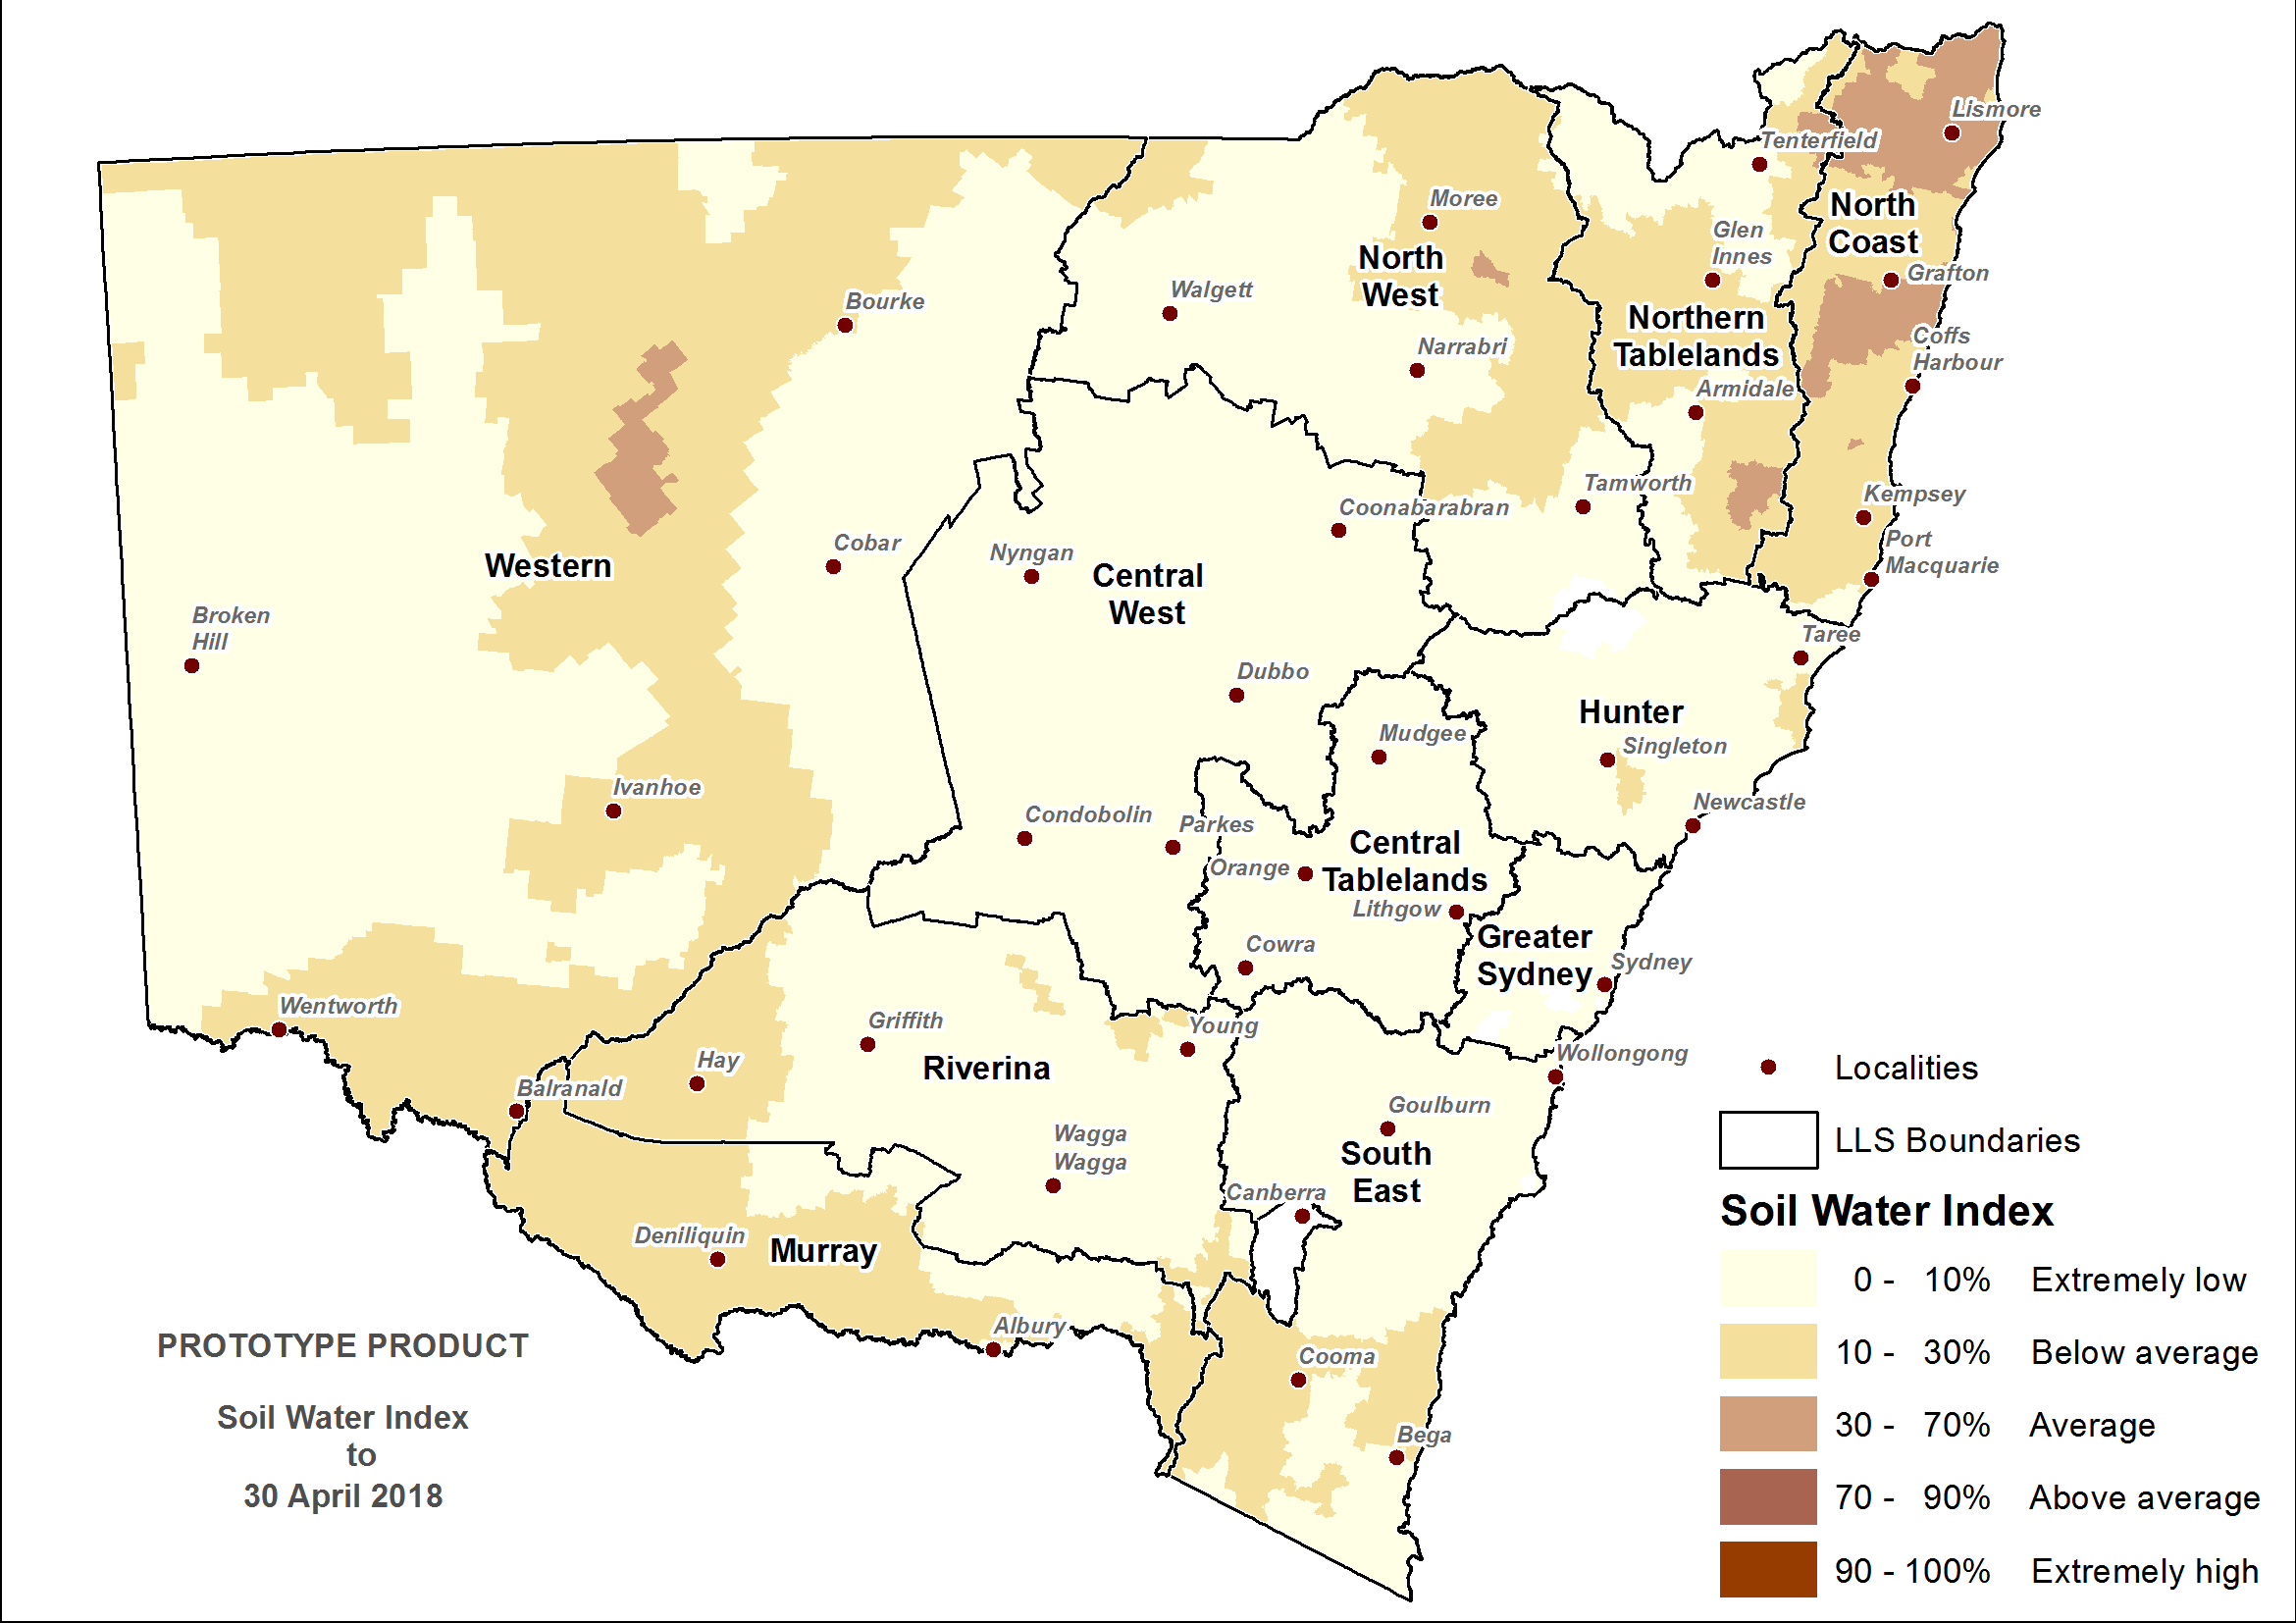 For an accessible explanation of this map contact the author anthony.clark@dpi.nsw.gov.au